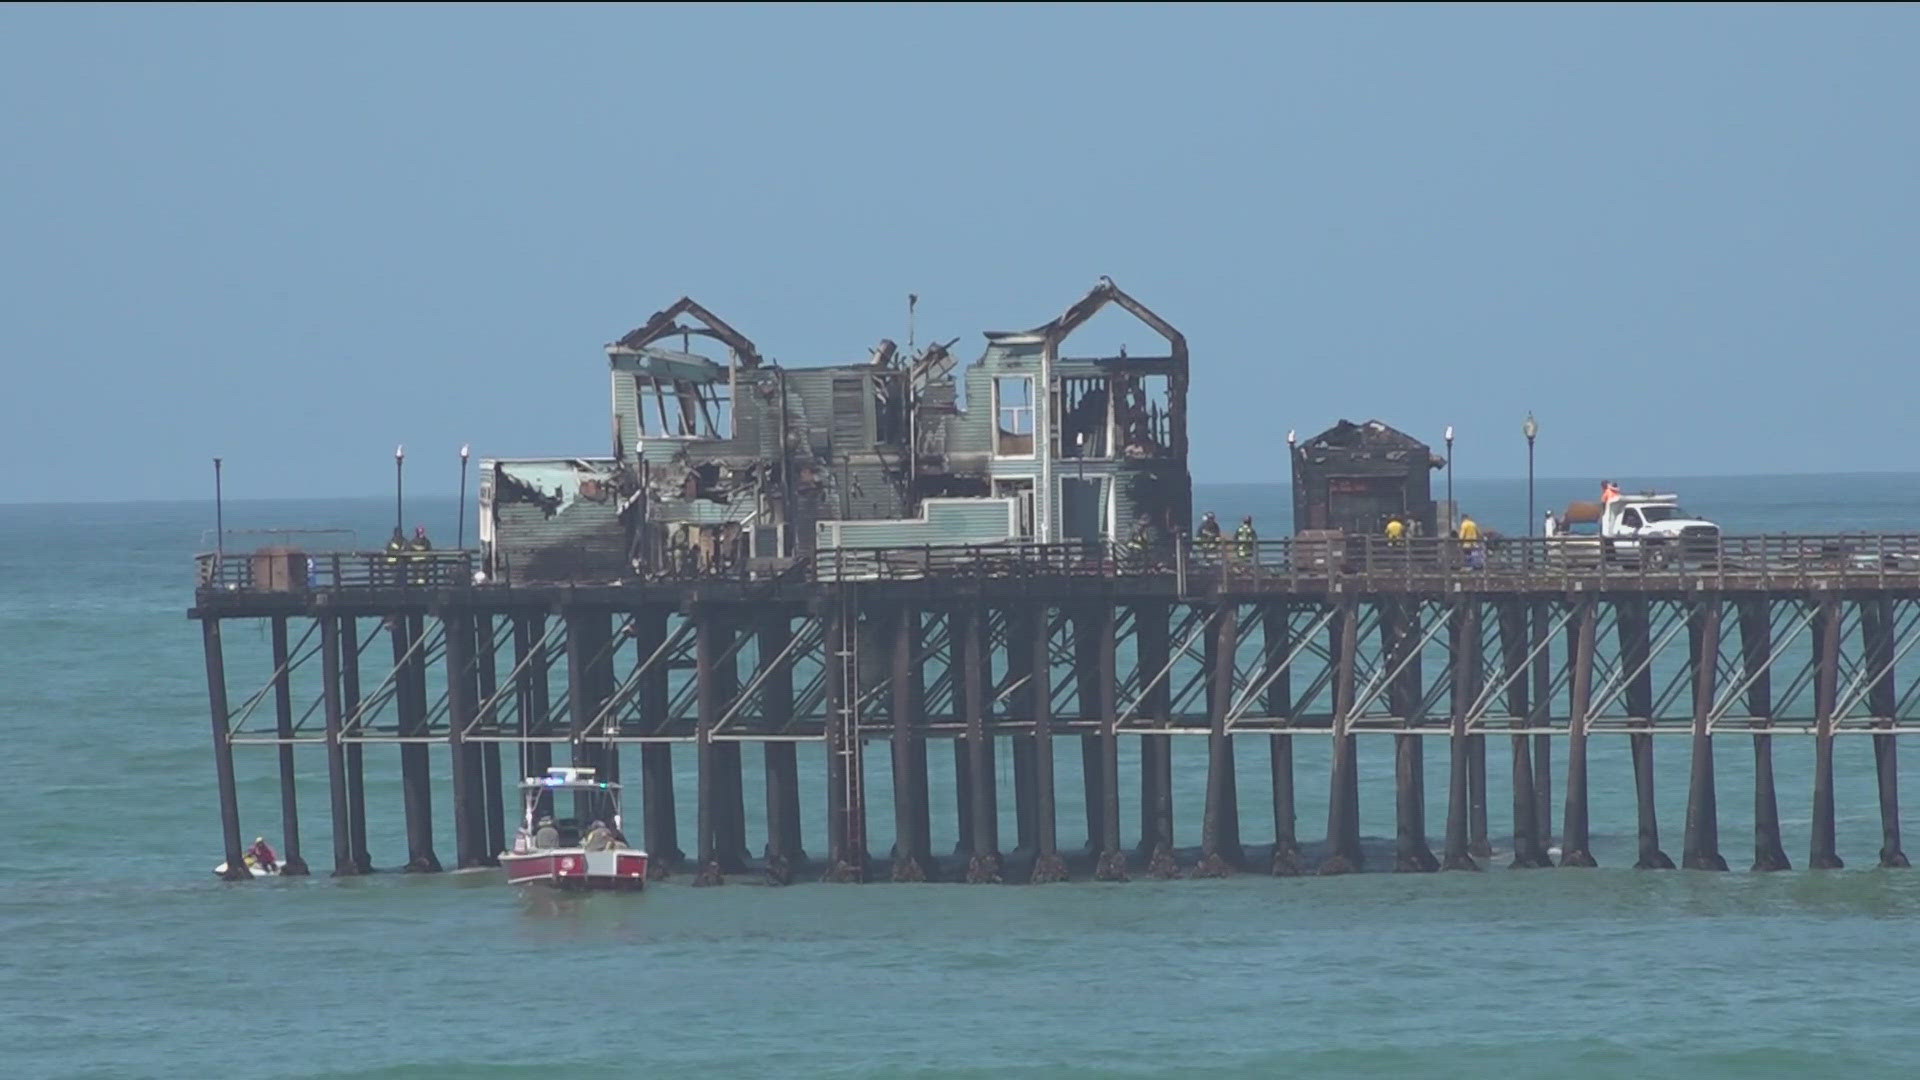 San Diego County community members are devastated over the iconic pier's damage.